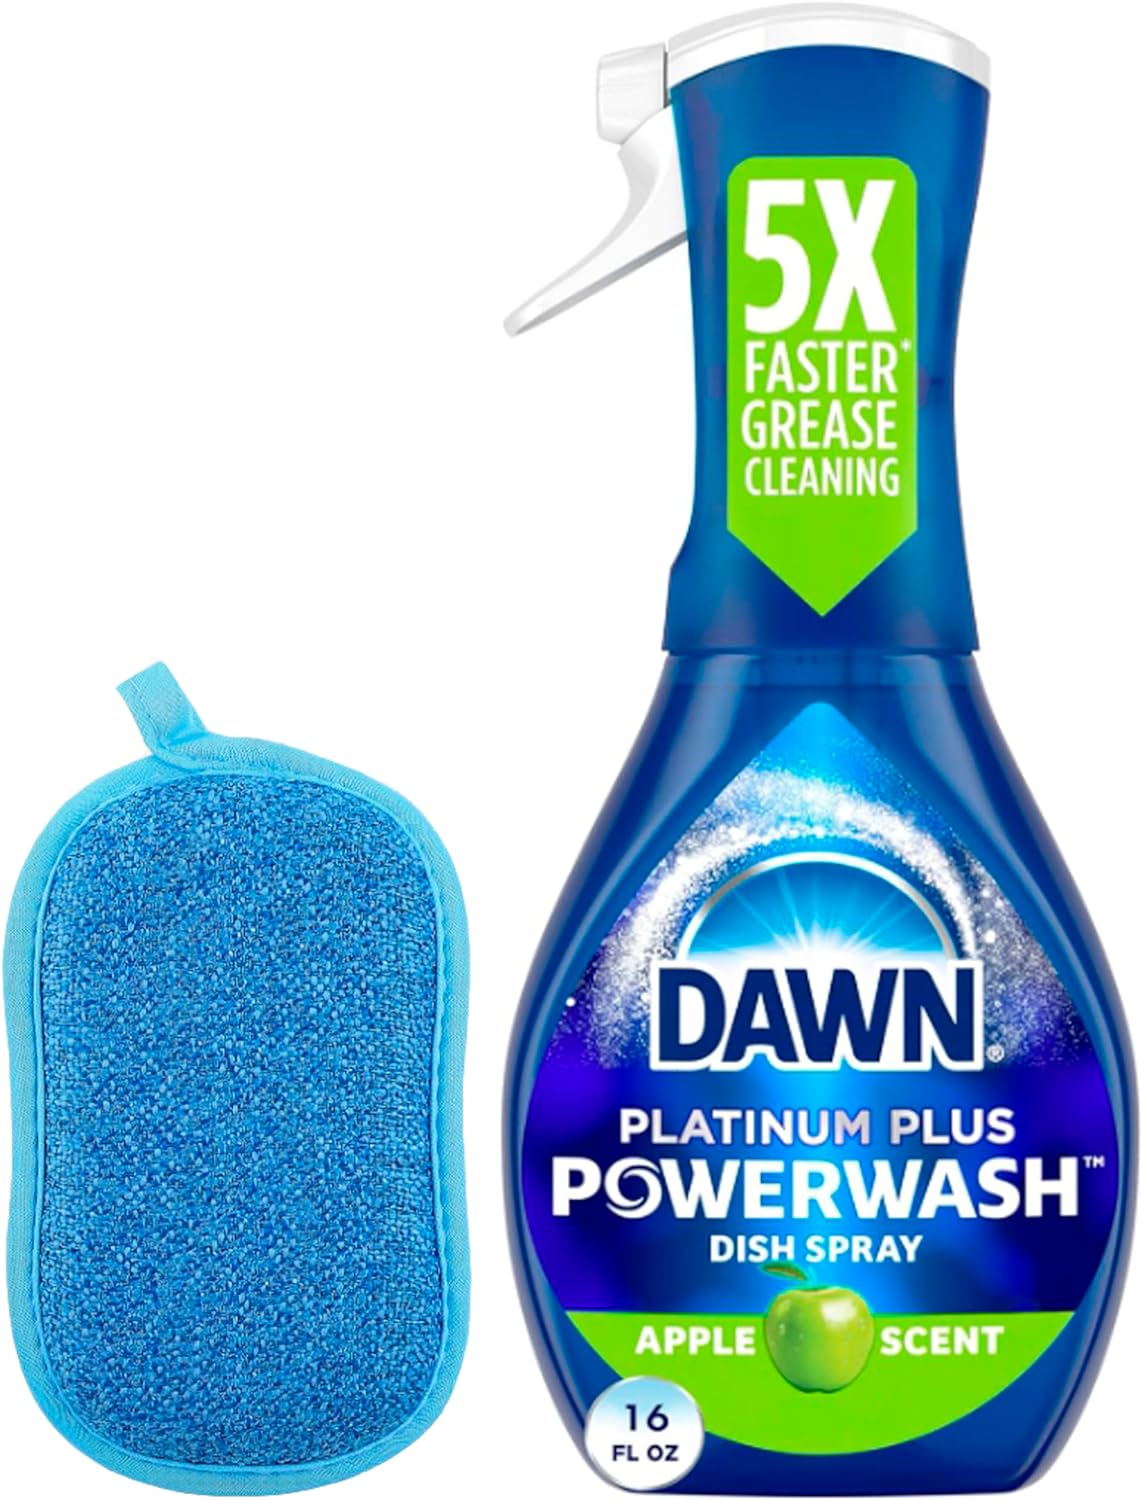 Dawn Platinum Powerwash Dish Spray, Dish Soap, Apple Scent (16 oz) The Set Includes a Universal Reusable Microfiber Cleaning Sponge (Color may vary)